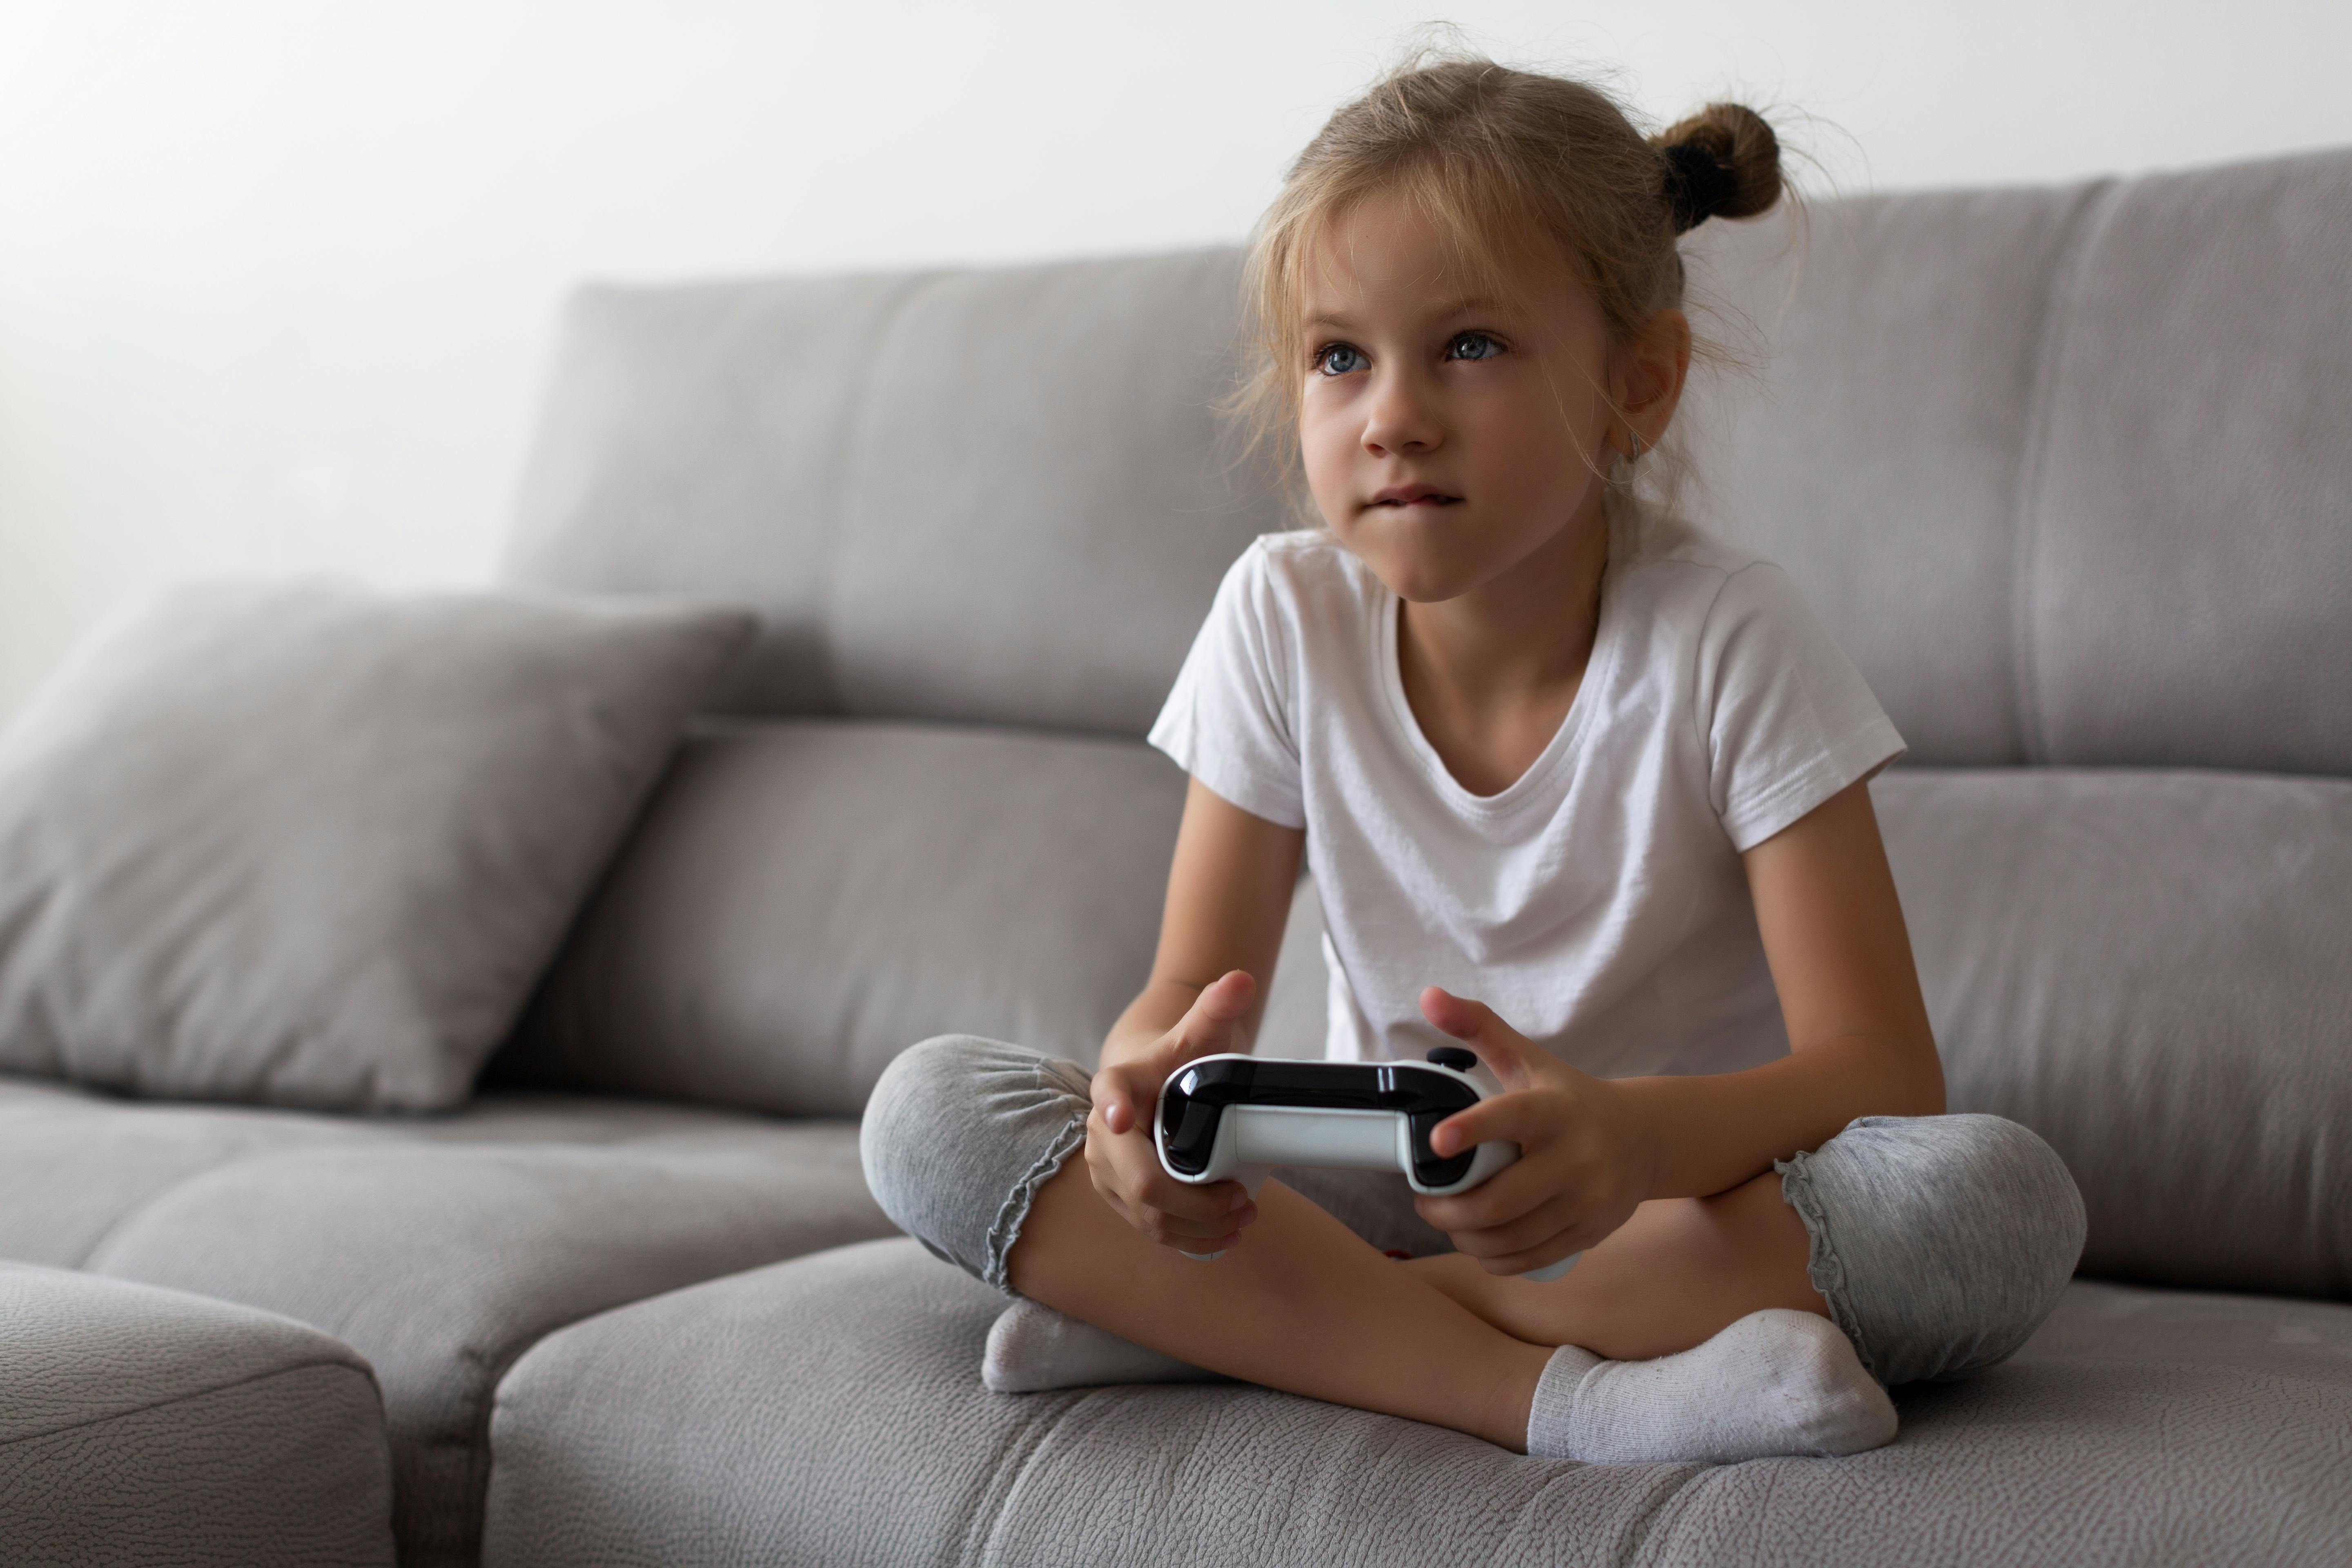 77 Video Game Names For Girls